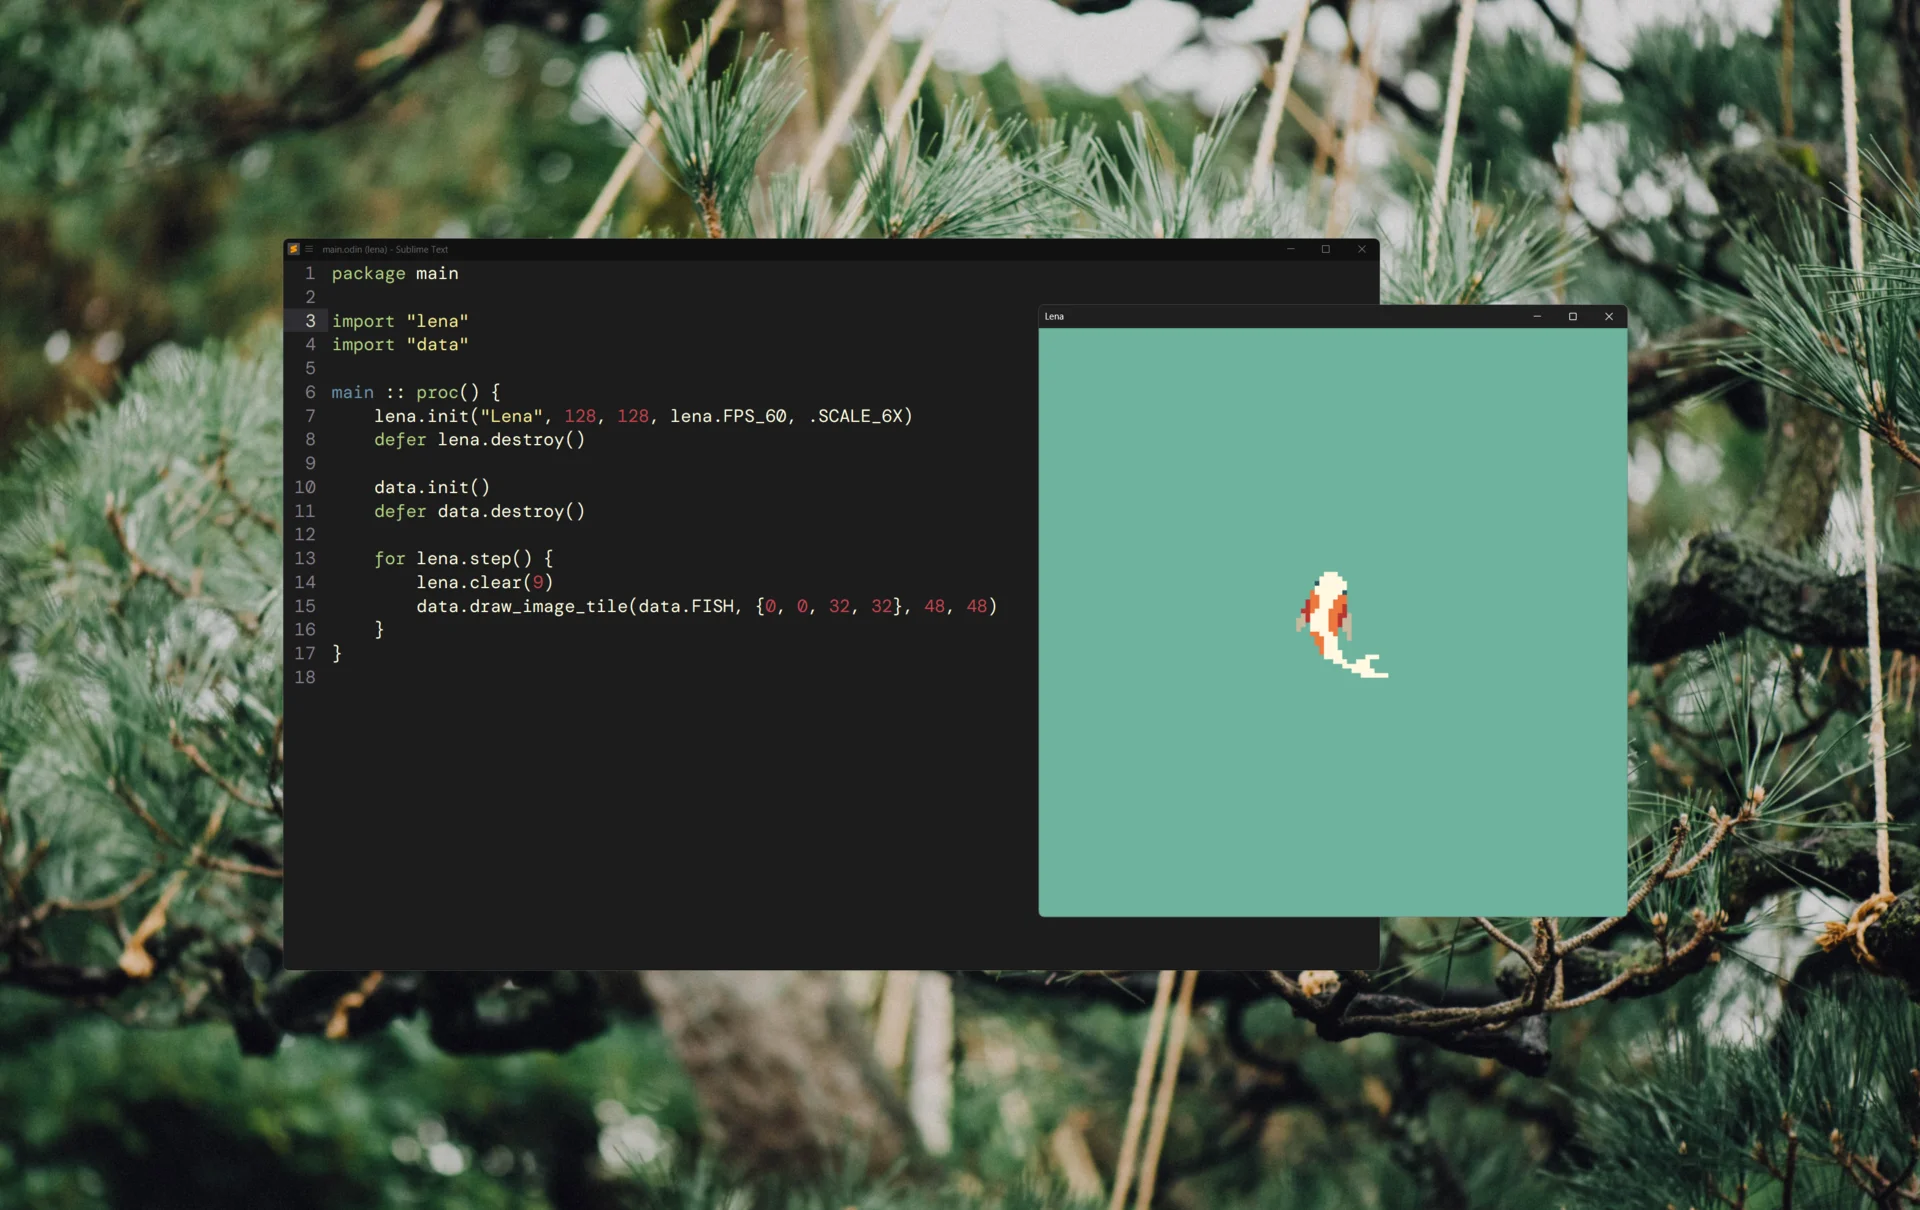 A screenshot showing a text editor with a simple Odin program using the Lena library. A second square window is the the running game, displaying a small pixel-art koi fish seen from above